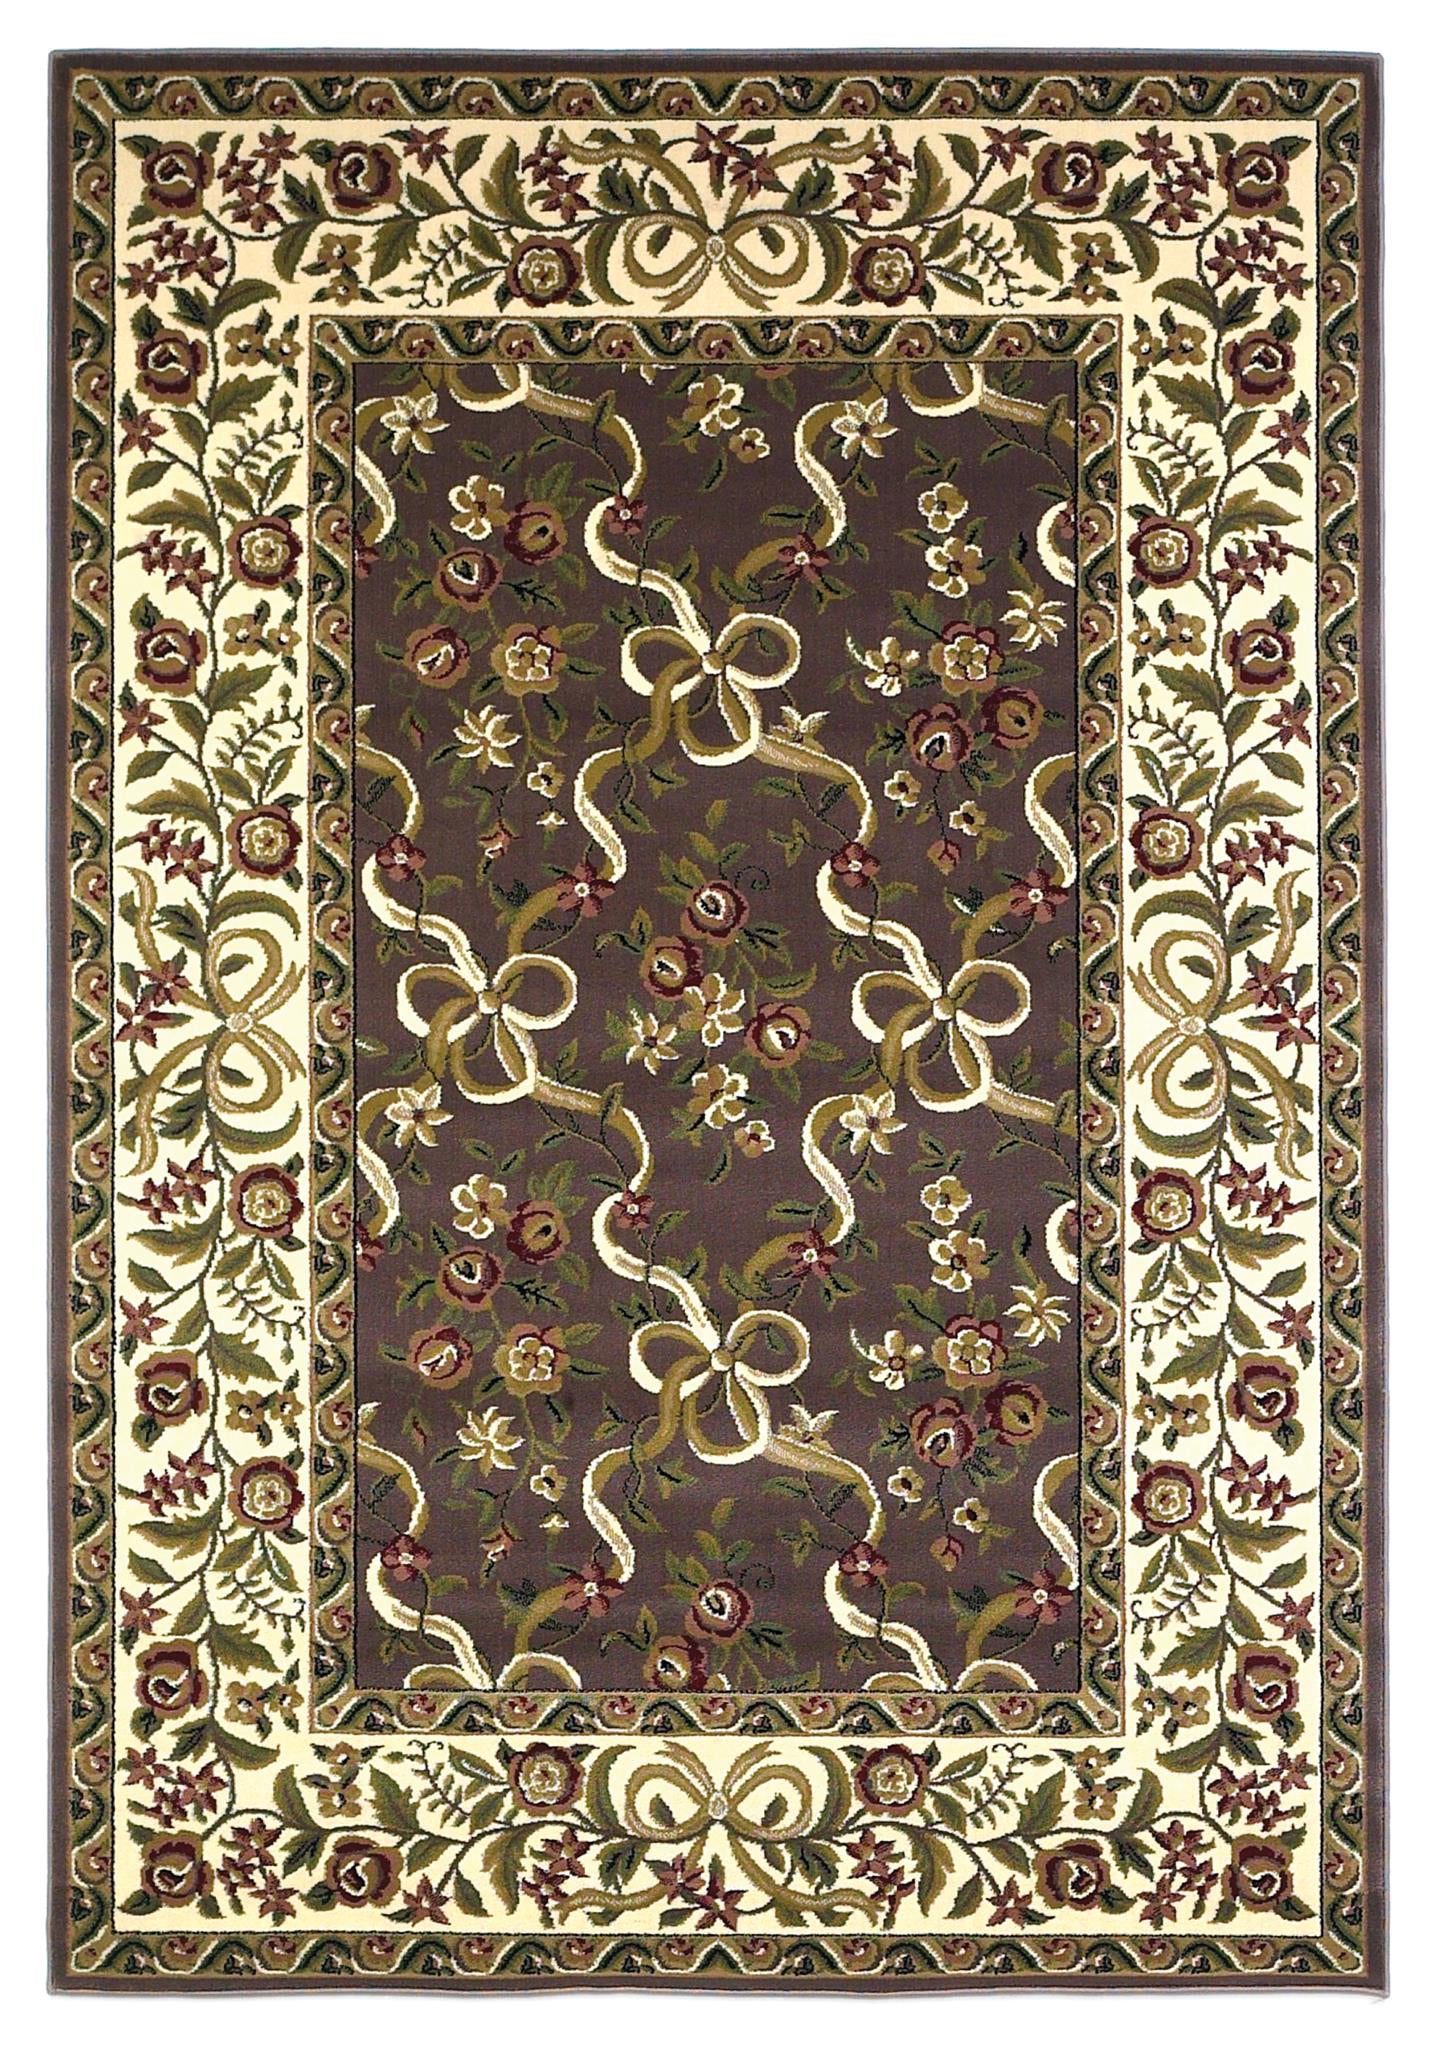 KAS Cambridge 7311 Plum/Ivory Floral Ribbons Area Rug main image